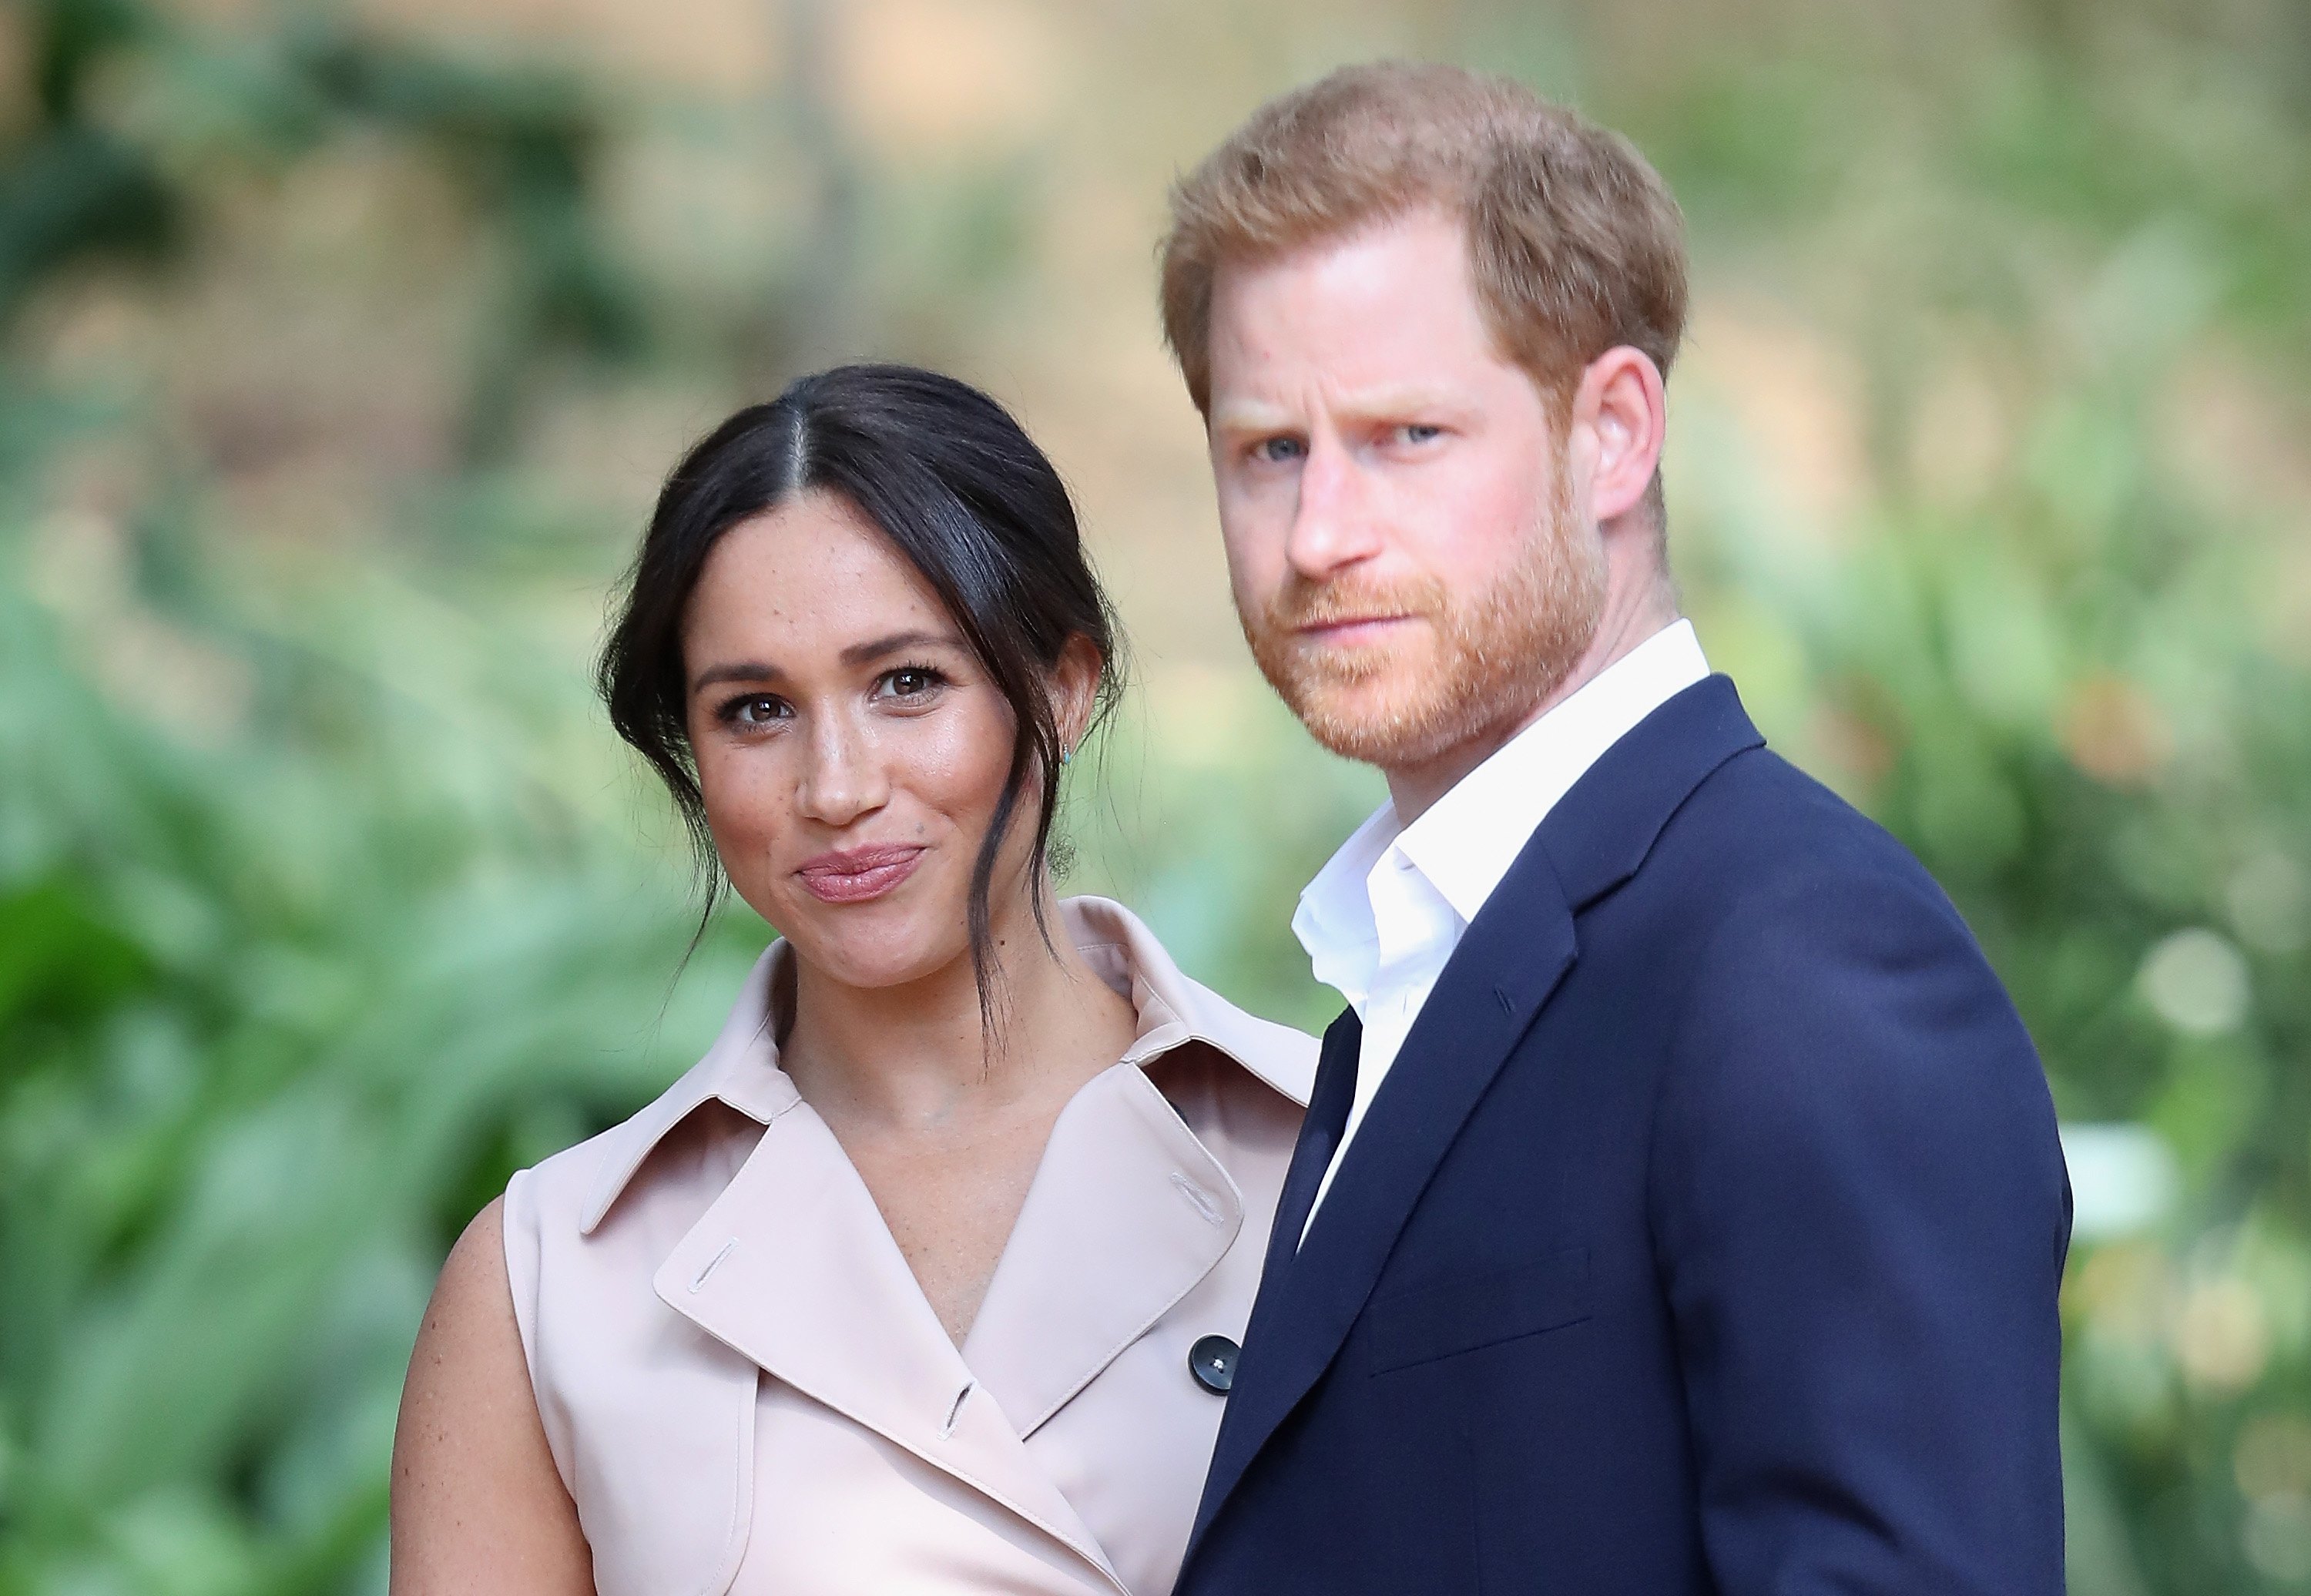 Prince Harry & Meghan Markle at a Creative Industries and Business Reception on Oct. 02, 2019 in South Africa | Photo: Getty Images 